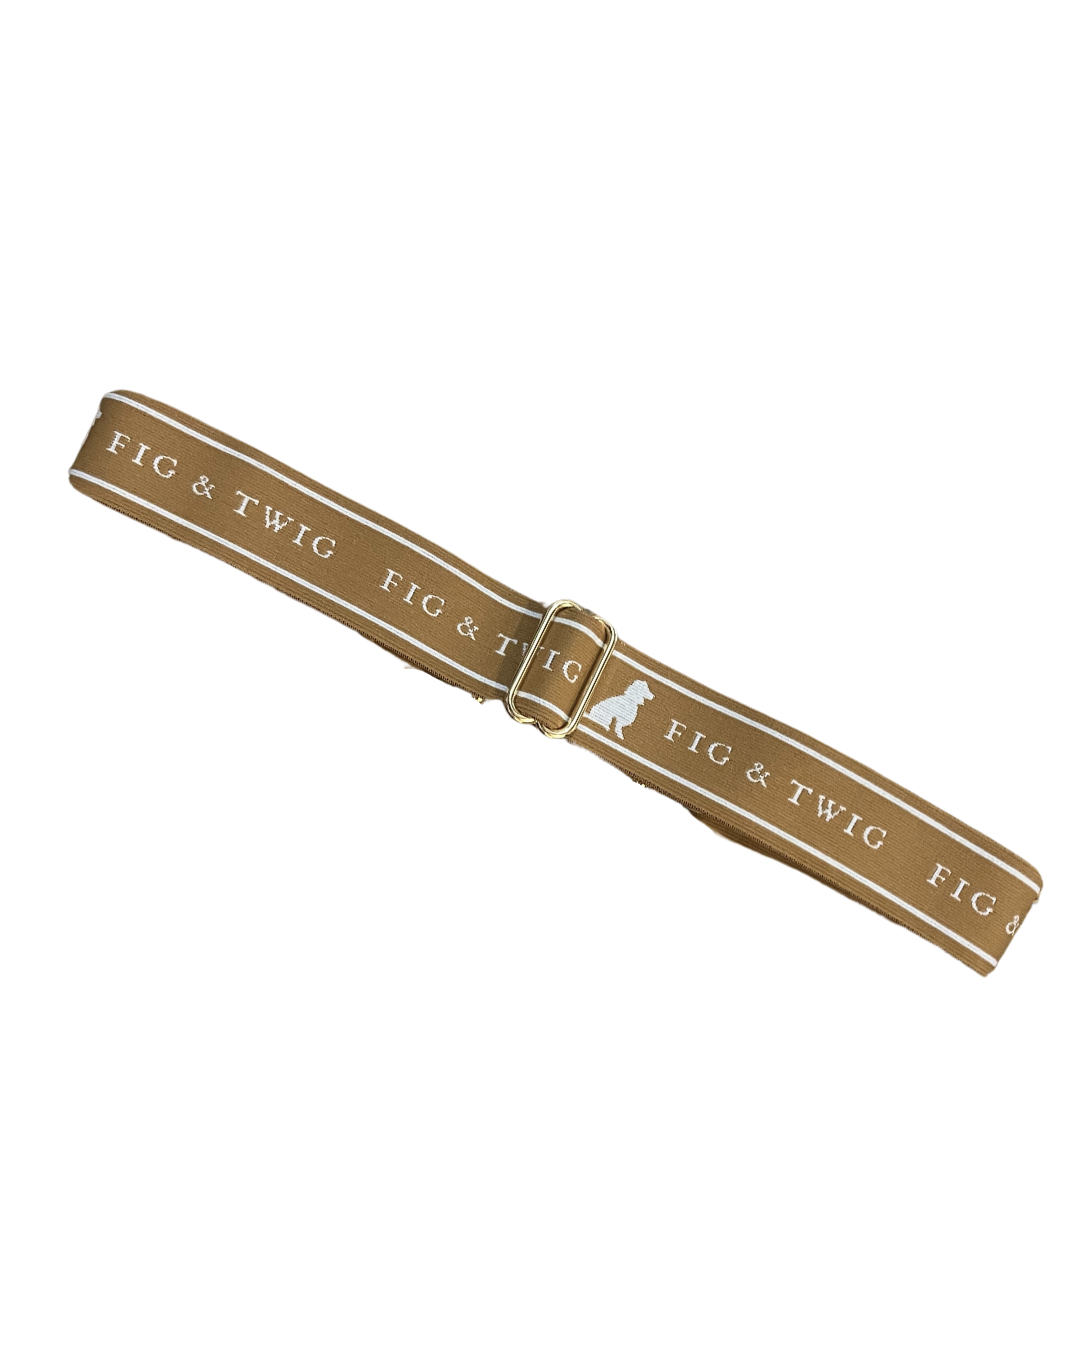 Willow Belt - Tan with Gold